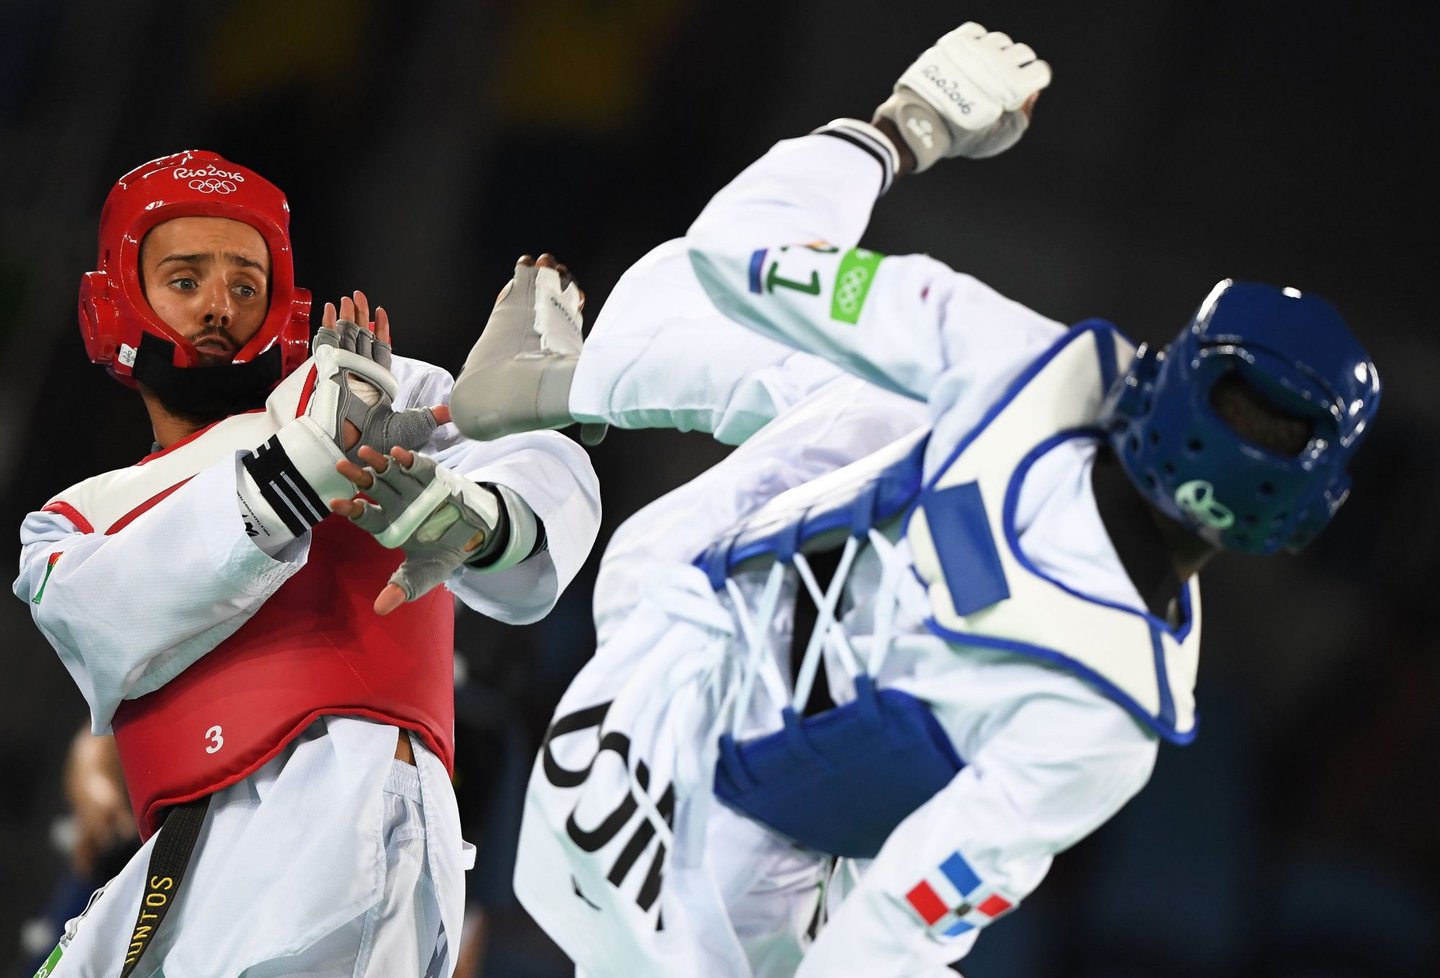 Portugal's Rui Braganca (L) competes against Dominican Republic's Luisito Pie during their men's taekwondo quarter-final bout in the -68kg category as part of the Rio 2016 Olympic Games, on August 18, 2016, at the Carioca Arena 3, in Rio de Janeiro. / AFP / Kirill KUDRYAVTSEV (Photo credit should read KIRILL KUDRYAVTSEV/AFP/Getty Images)